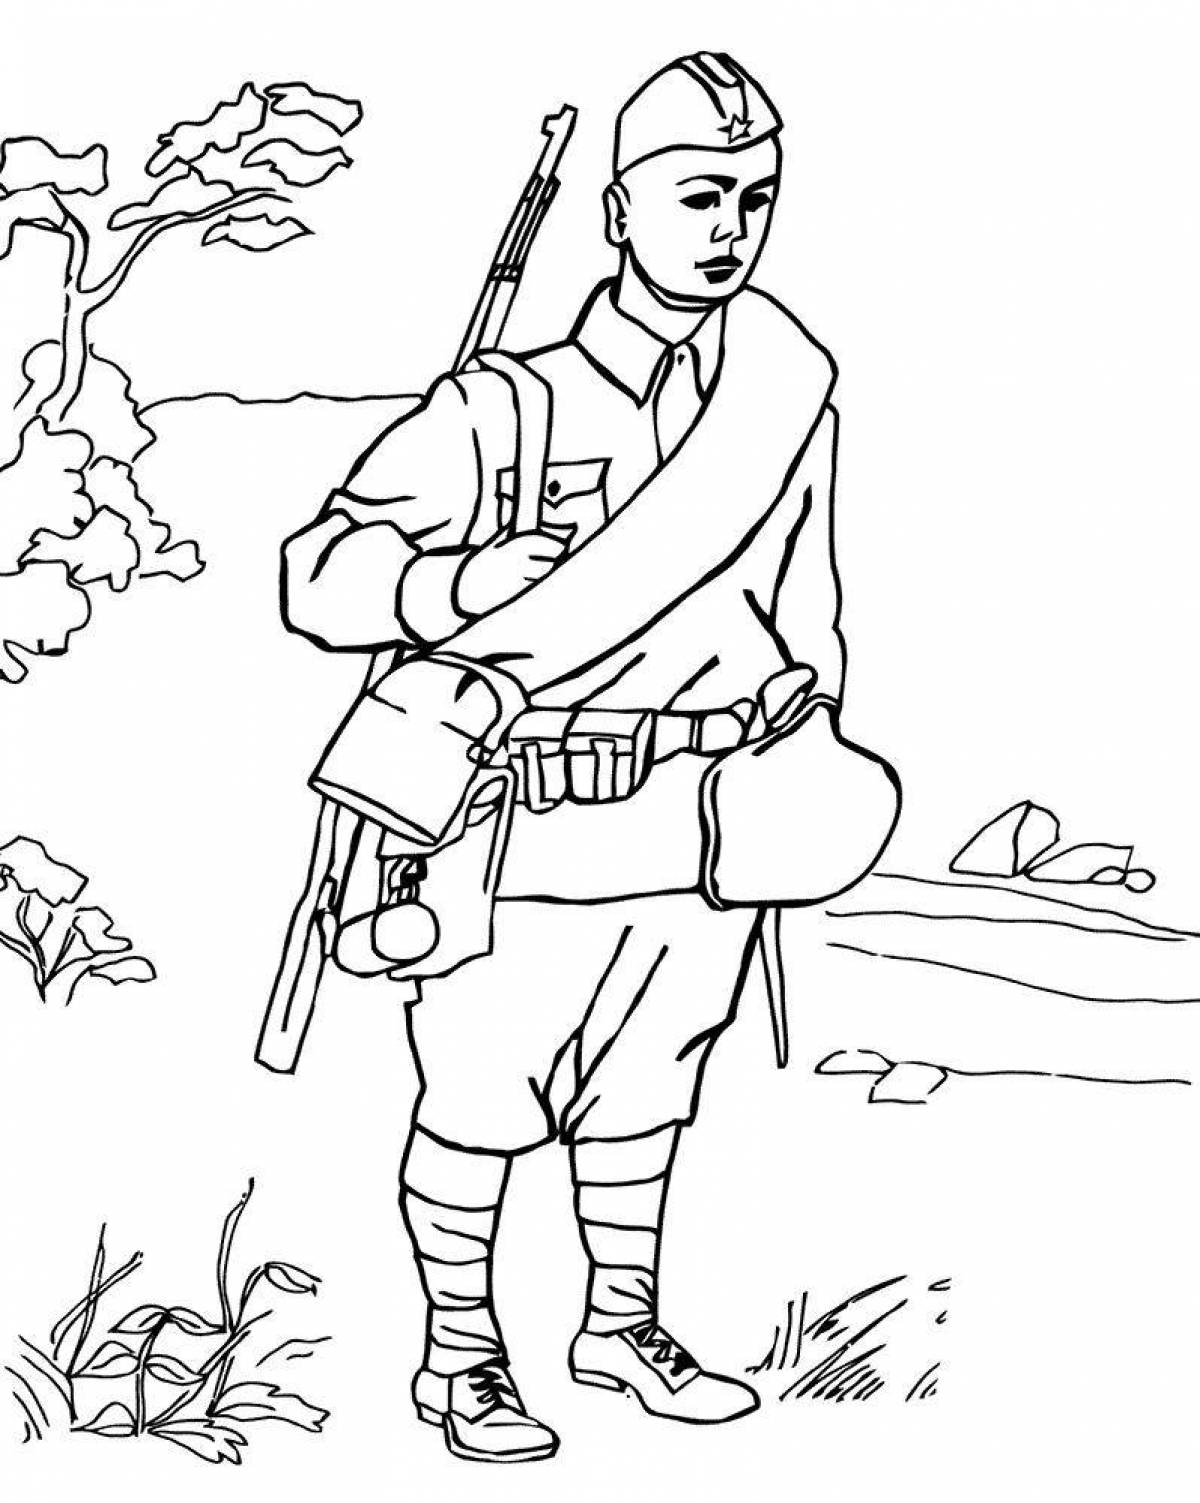 Witty coloring drawing of a soldier from a schoolboy